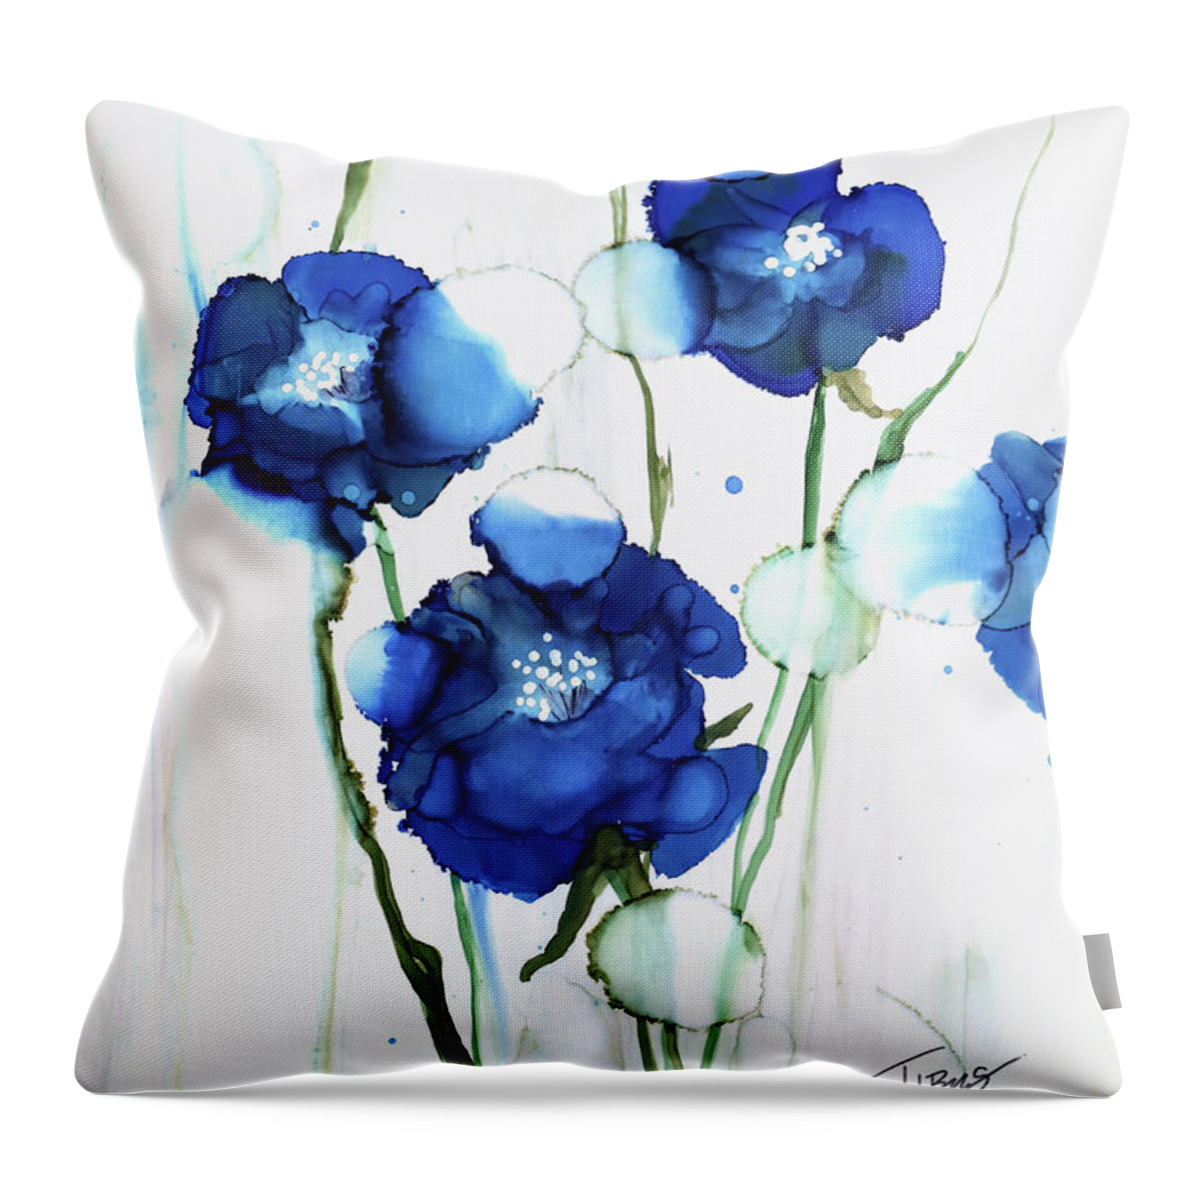  Throw Pillow featuring the painting Morning Dew by Julie Tibus